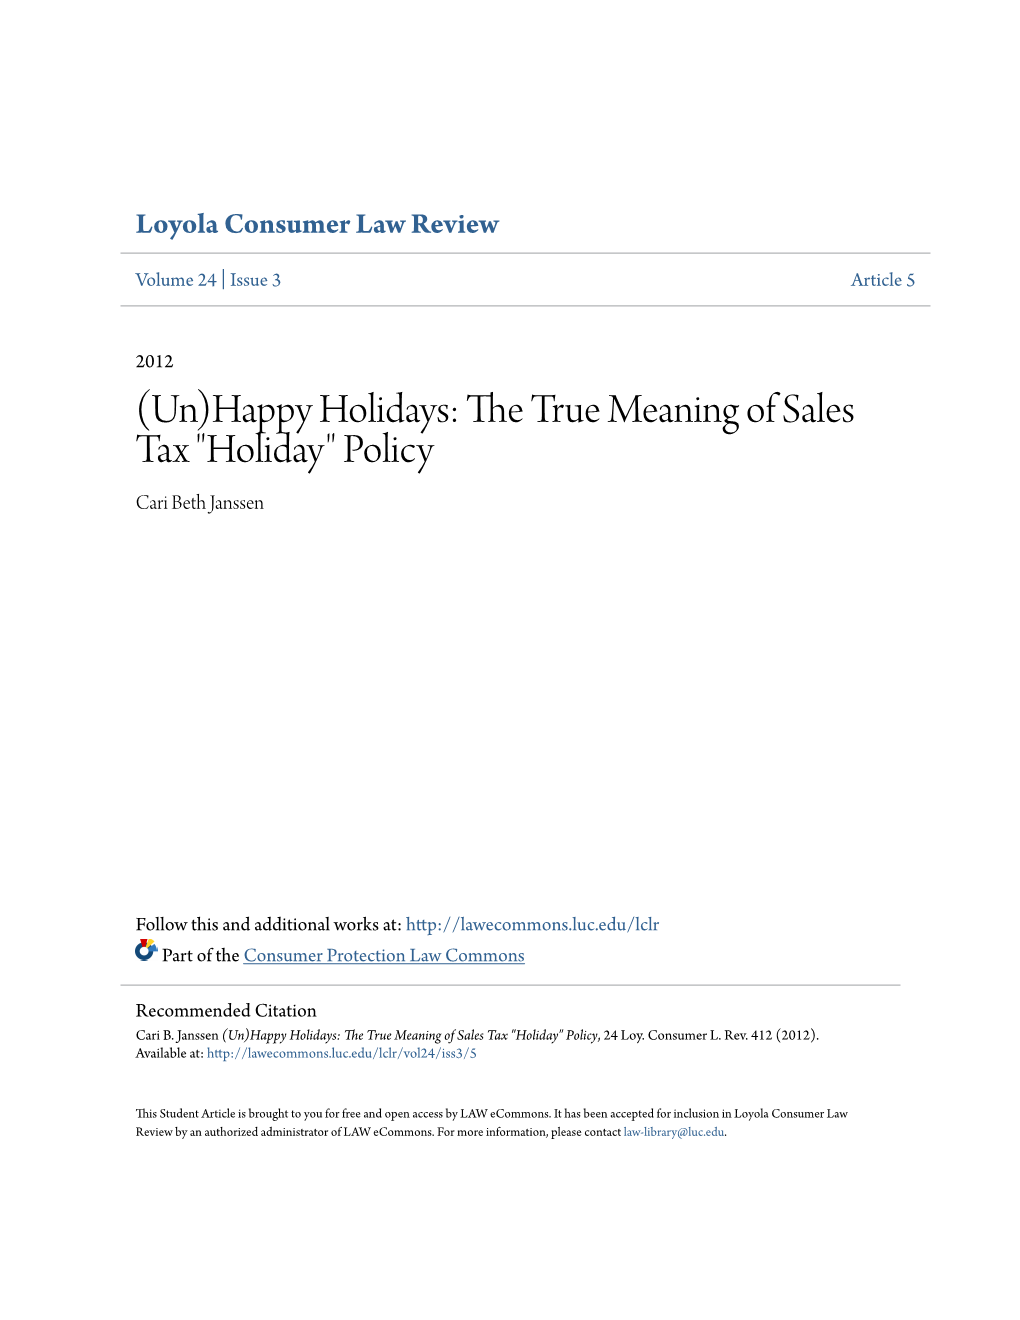 The True Meaning of Sales Tax "Holiday" Policy, 24 Loy